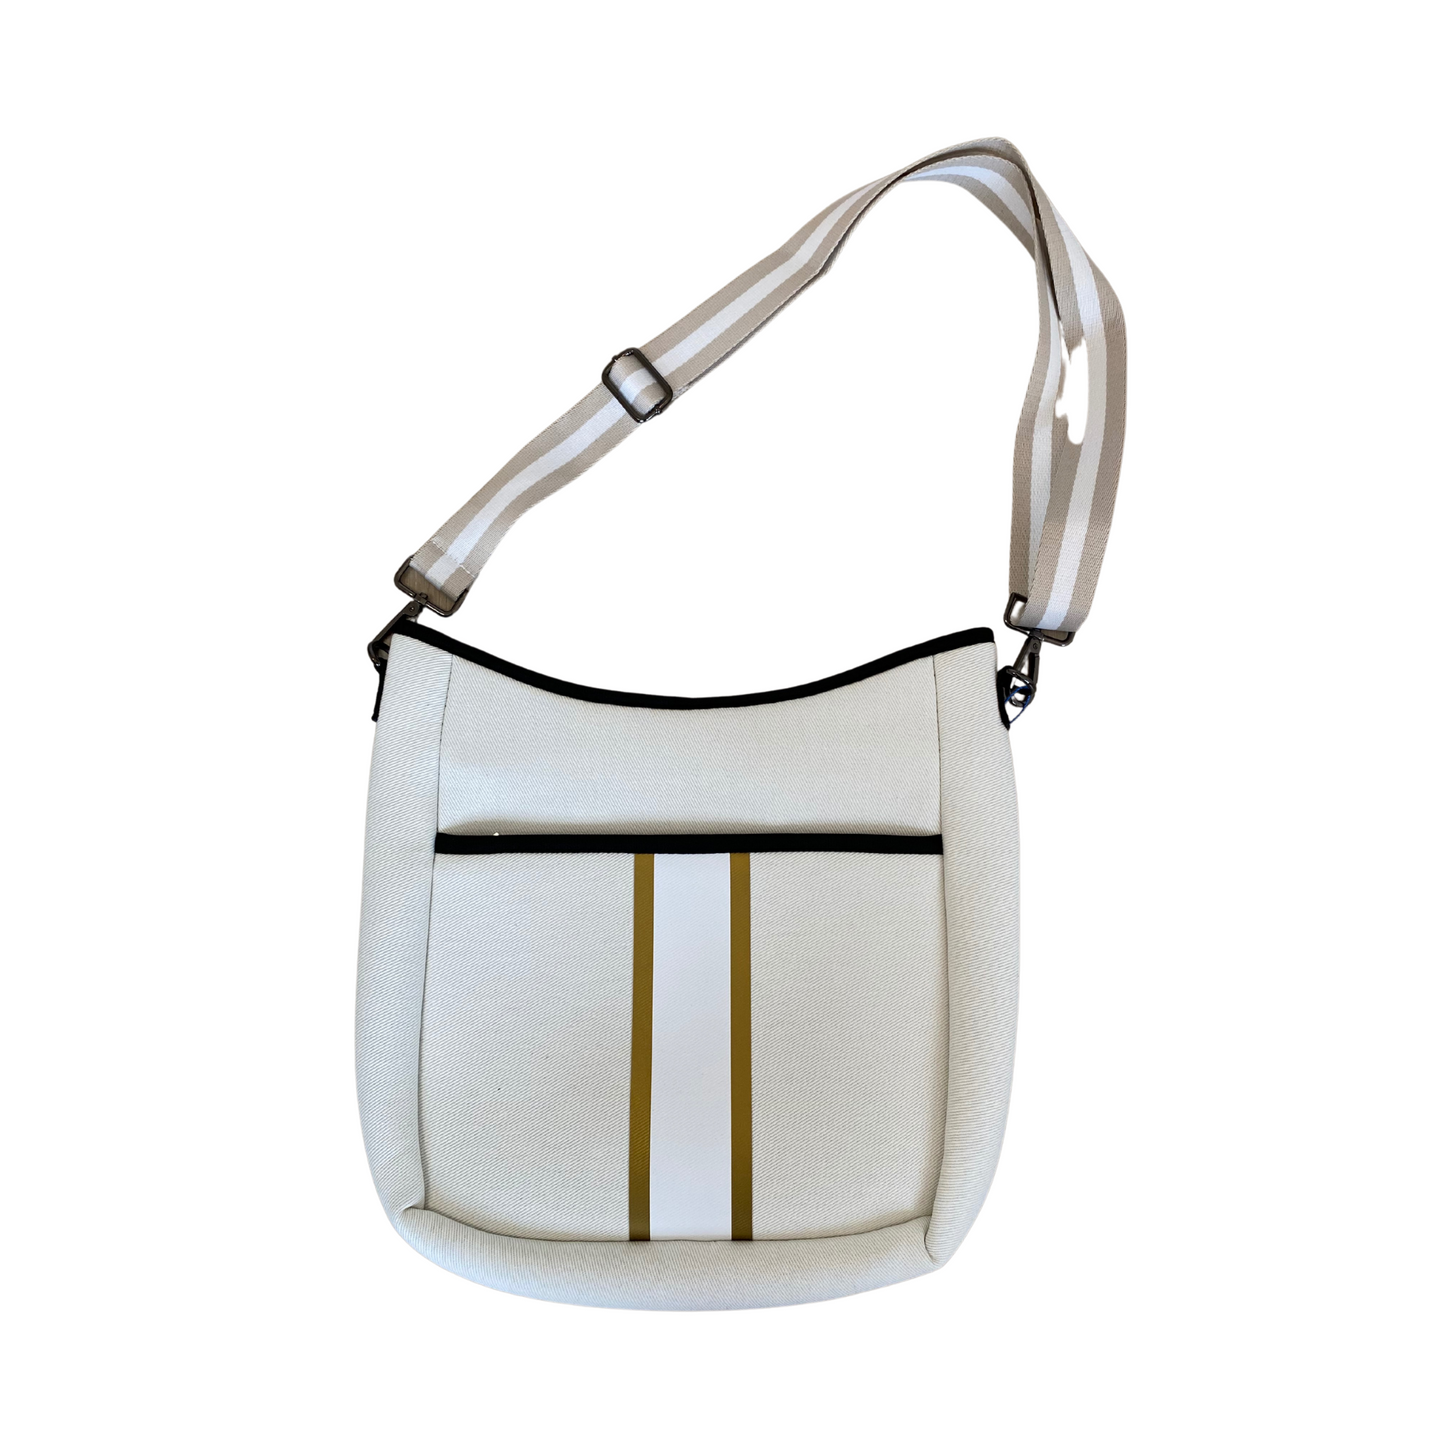 Canvas and Gold Neoprene Crossbody Bag, Neoprene Crossbody Bag, Crossbody Bag, Neoprene Bag, Bag, Neoprene Accessories, Accessories